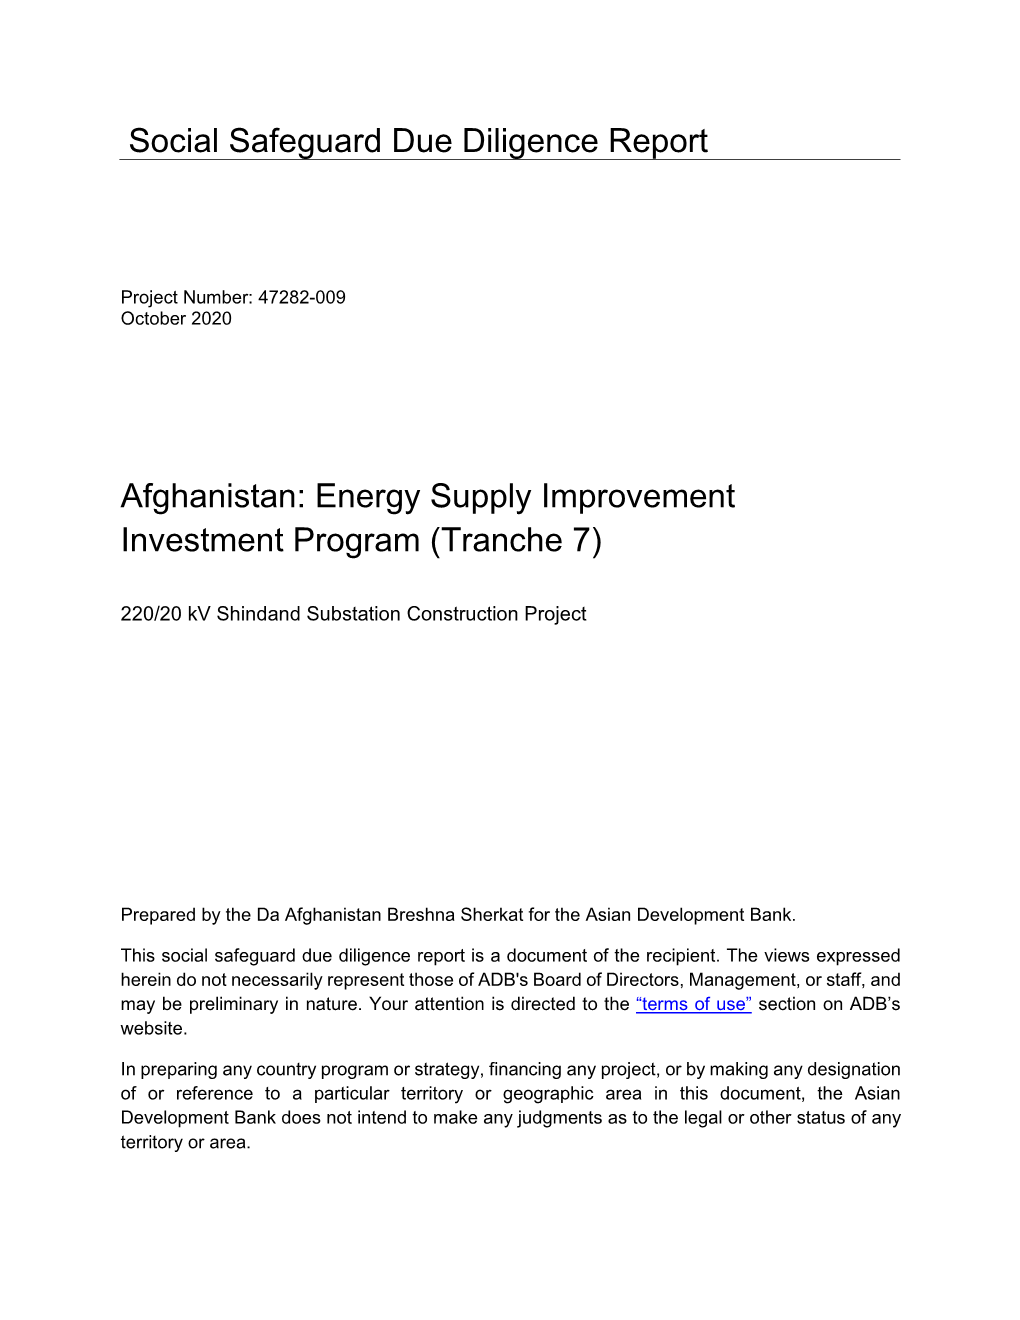 Social Safeguard Due Diligence Report Afghanistan: Energy Supply